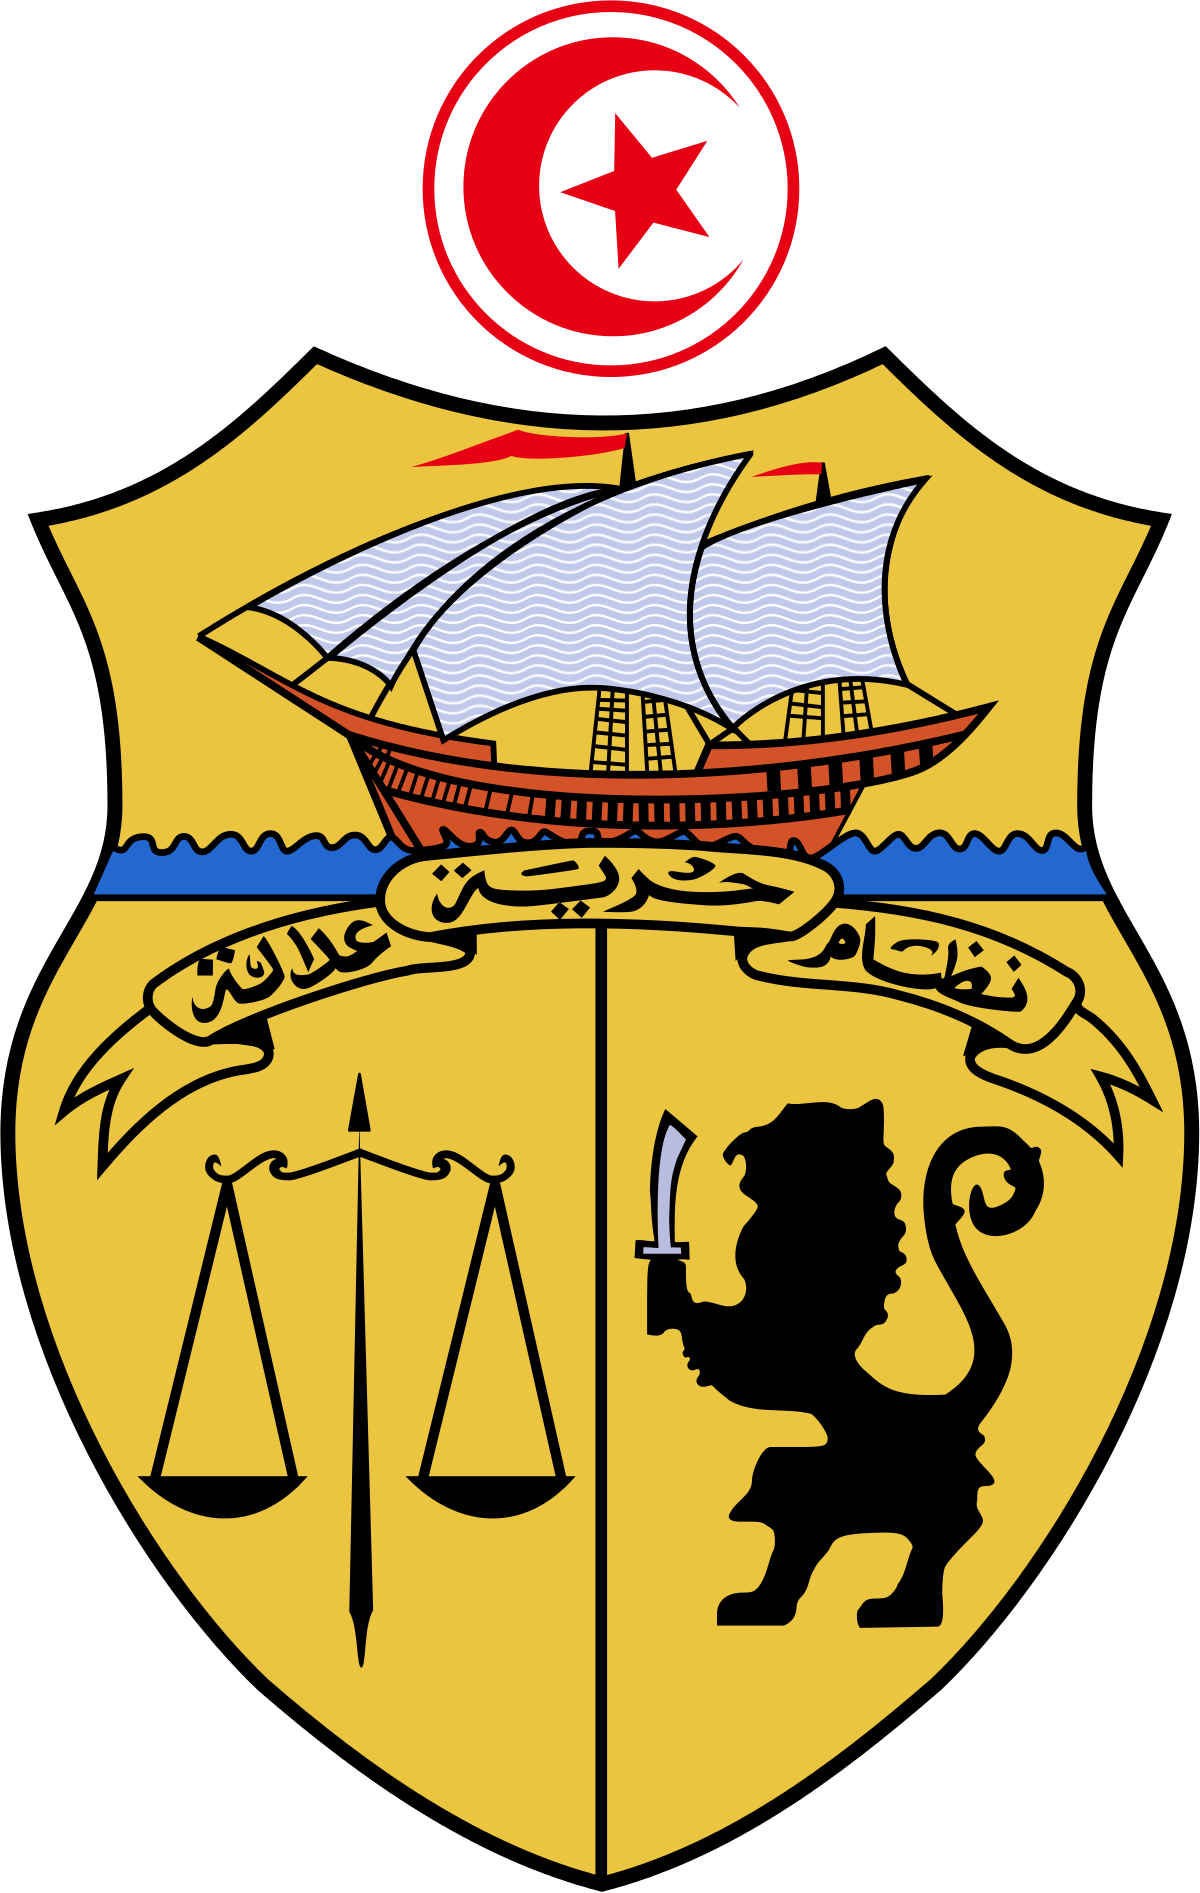 Coat of arms tunisia. Democracy clipart government structure